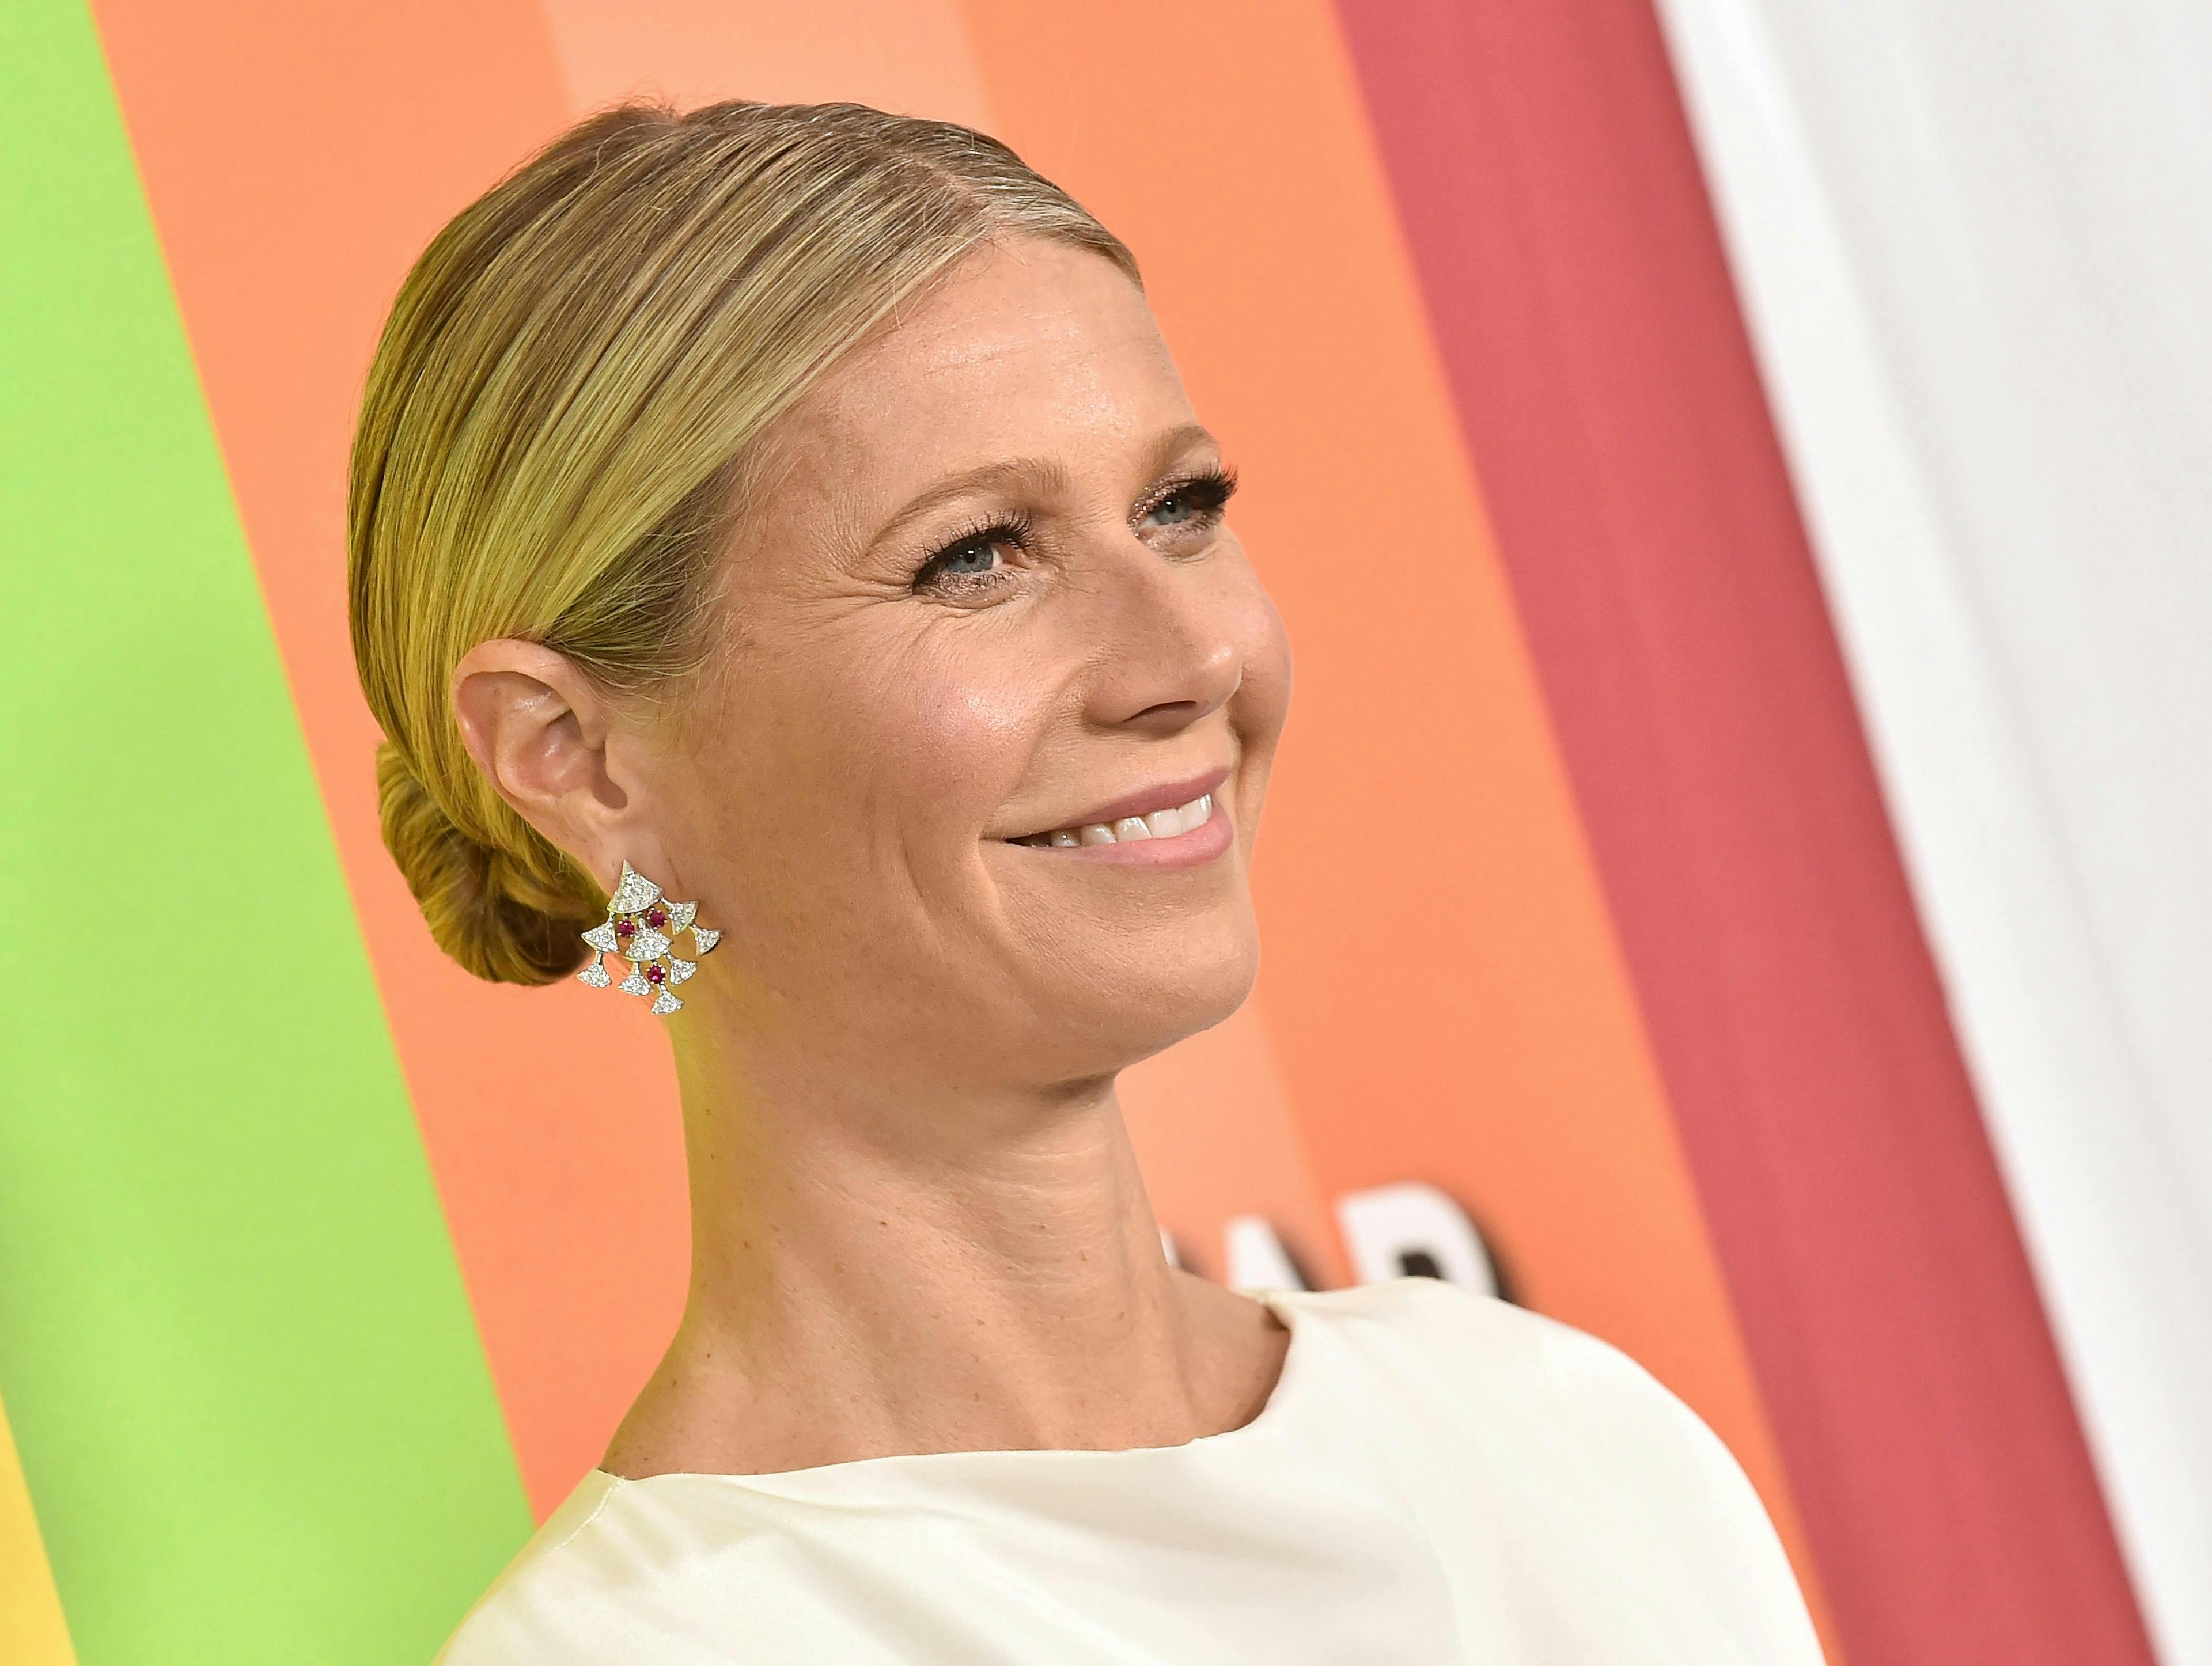 actress,celebrity,famous,star,entertainment,famous people,head shot,red carpet arrivals,celebrity red carpet,premiere,actor,fame personality,horizontal,personality,gwyneth paltrow,talent,event blonde hair person head face accessories earring jewelry neck smile